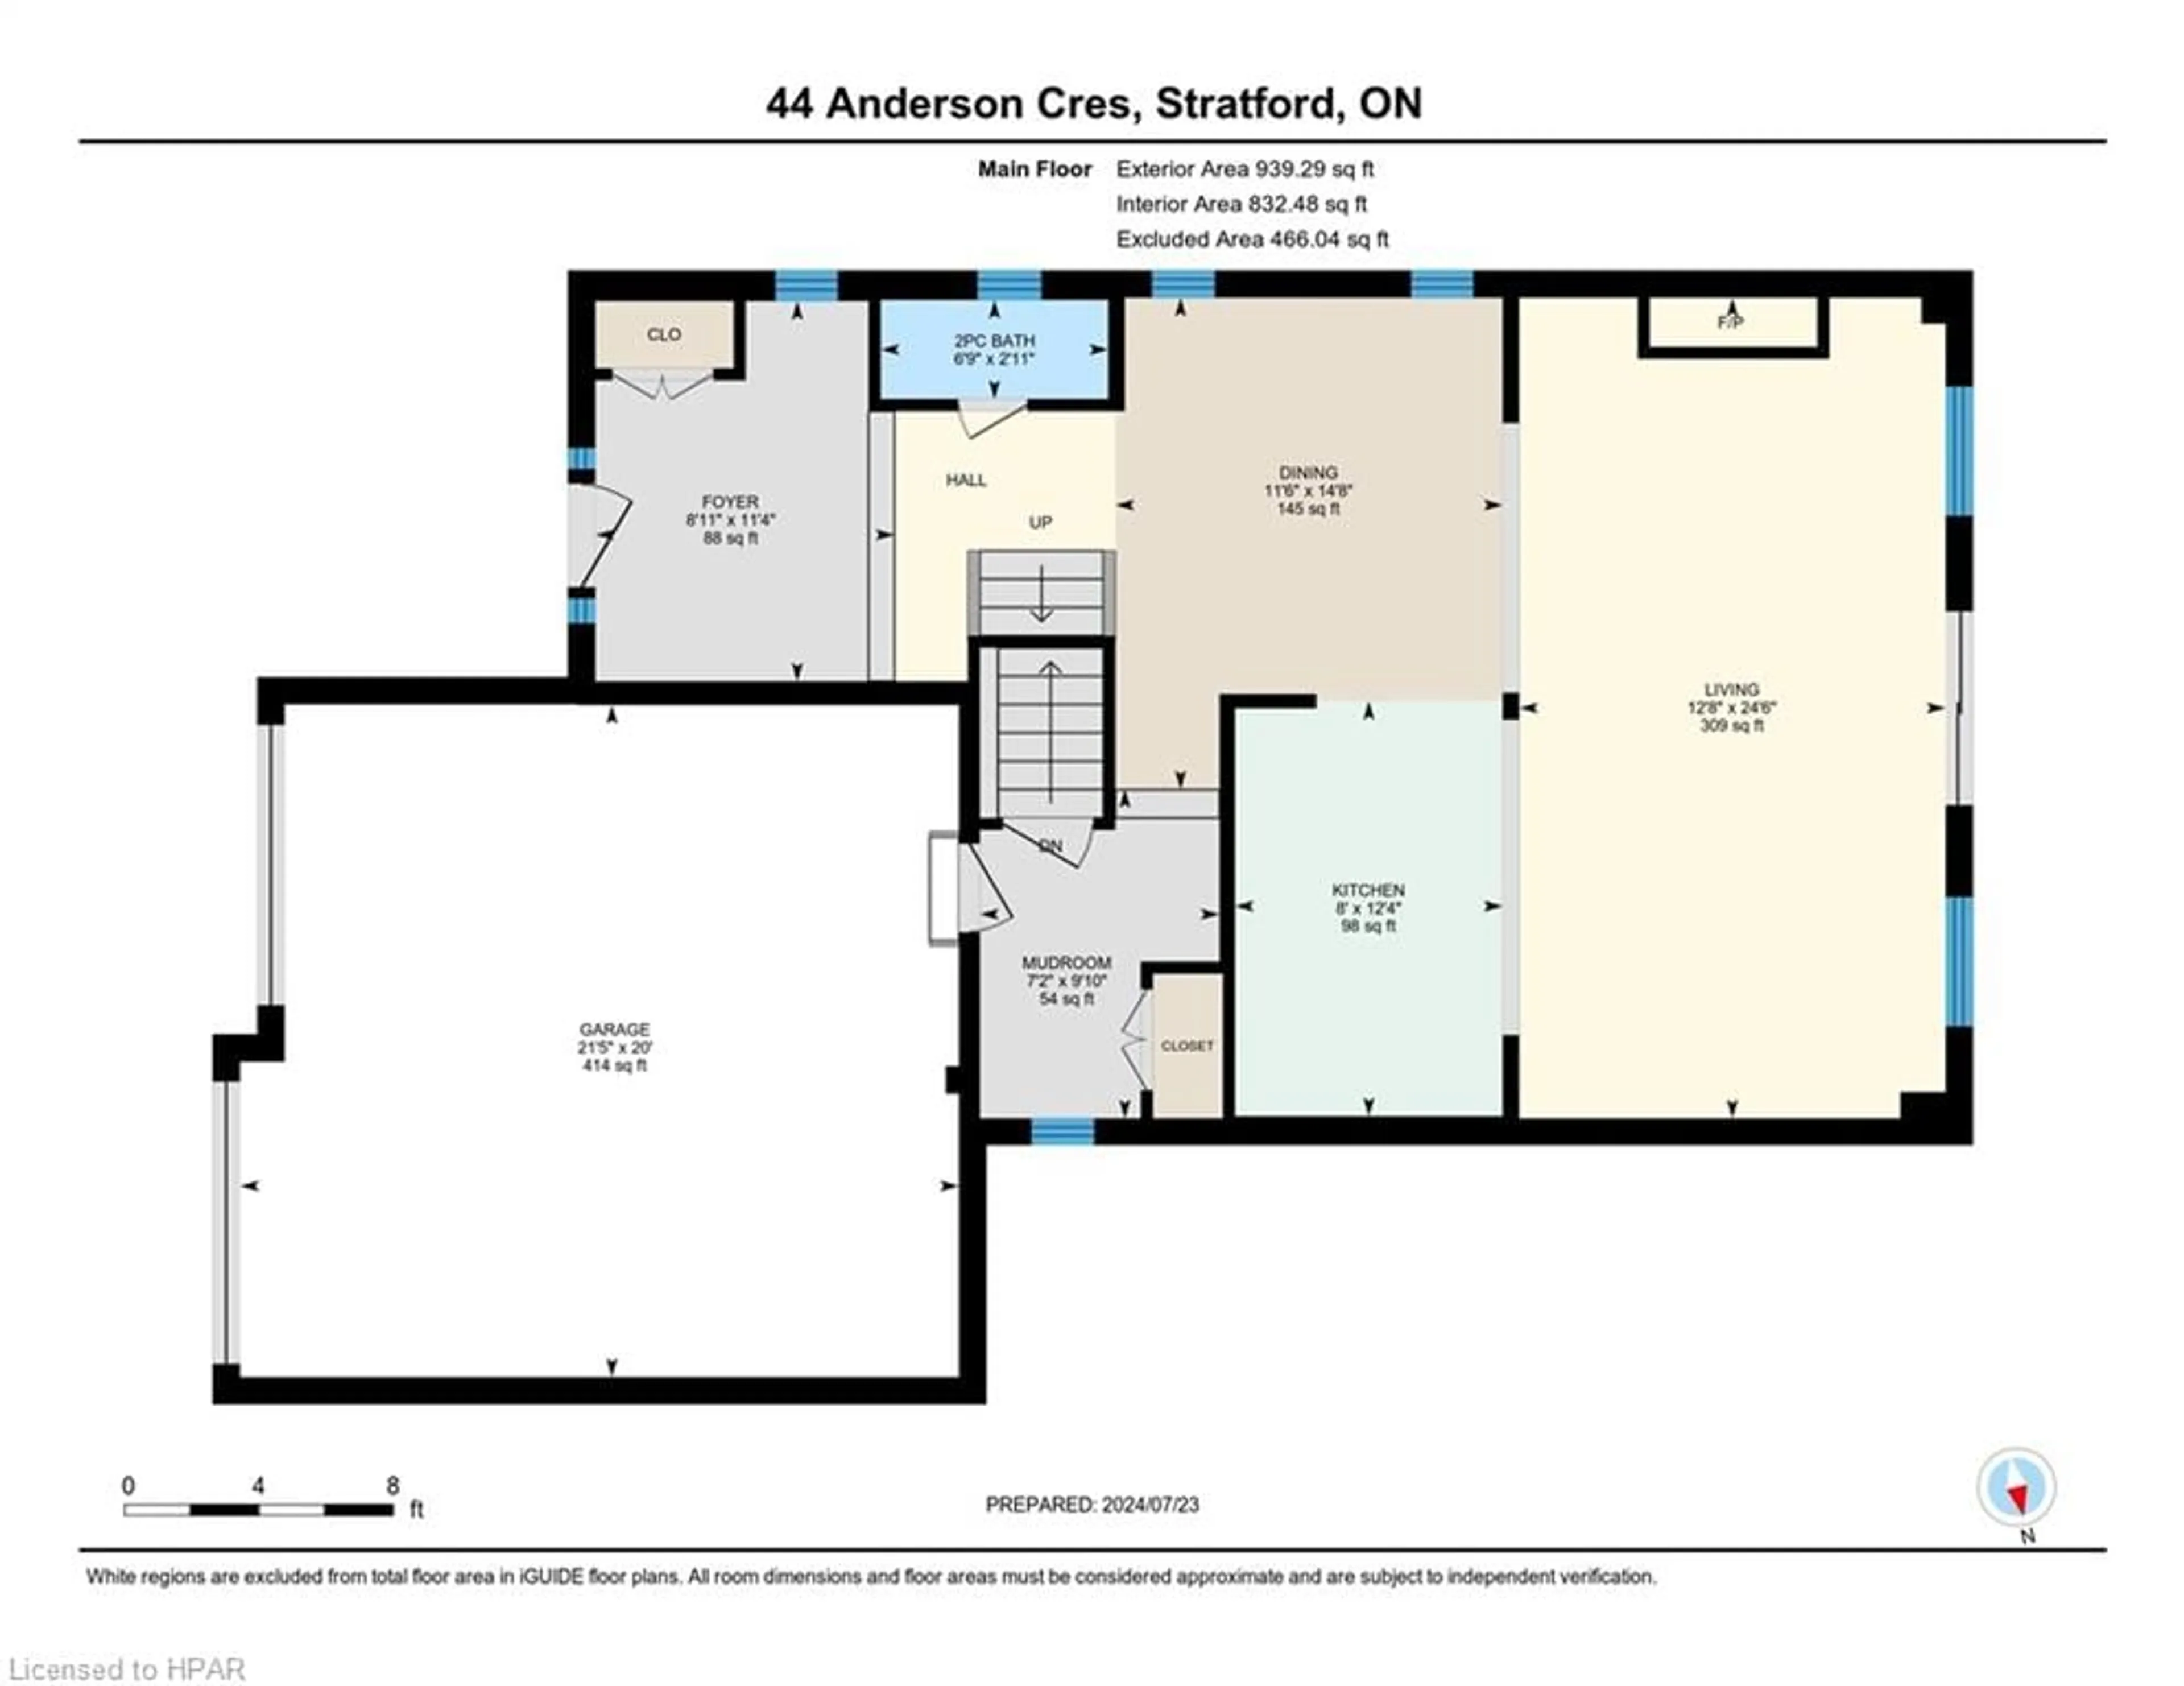 Floor plan for 44 Anderson Crescent, Stratford Ontario N5A 7S2